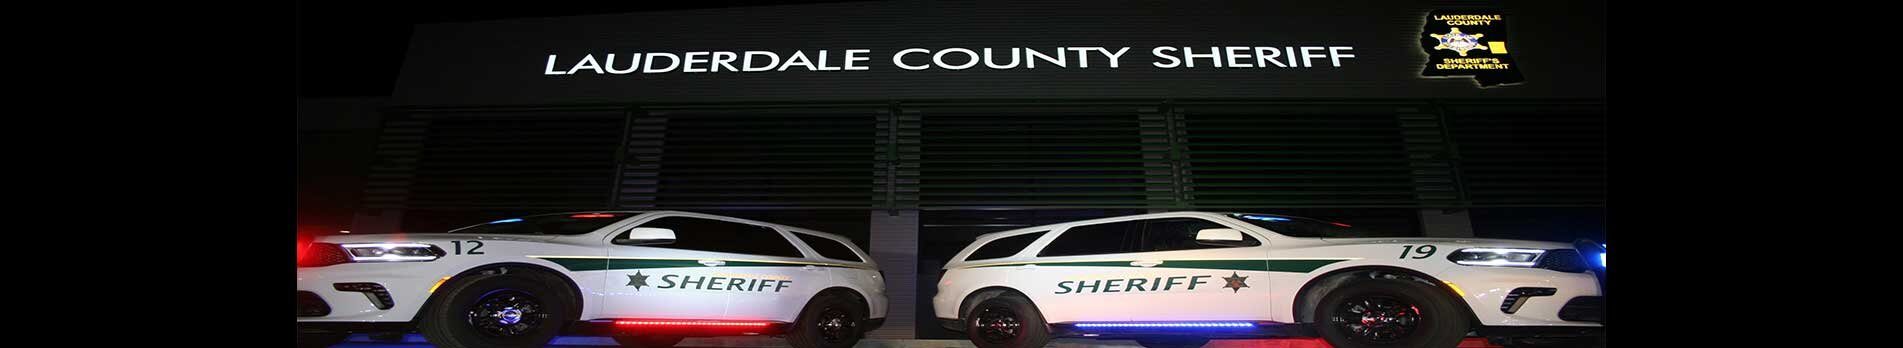 Two Lauderdale County Sheriff's Office patrol cars in front of the Sheriff's Office at night.